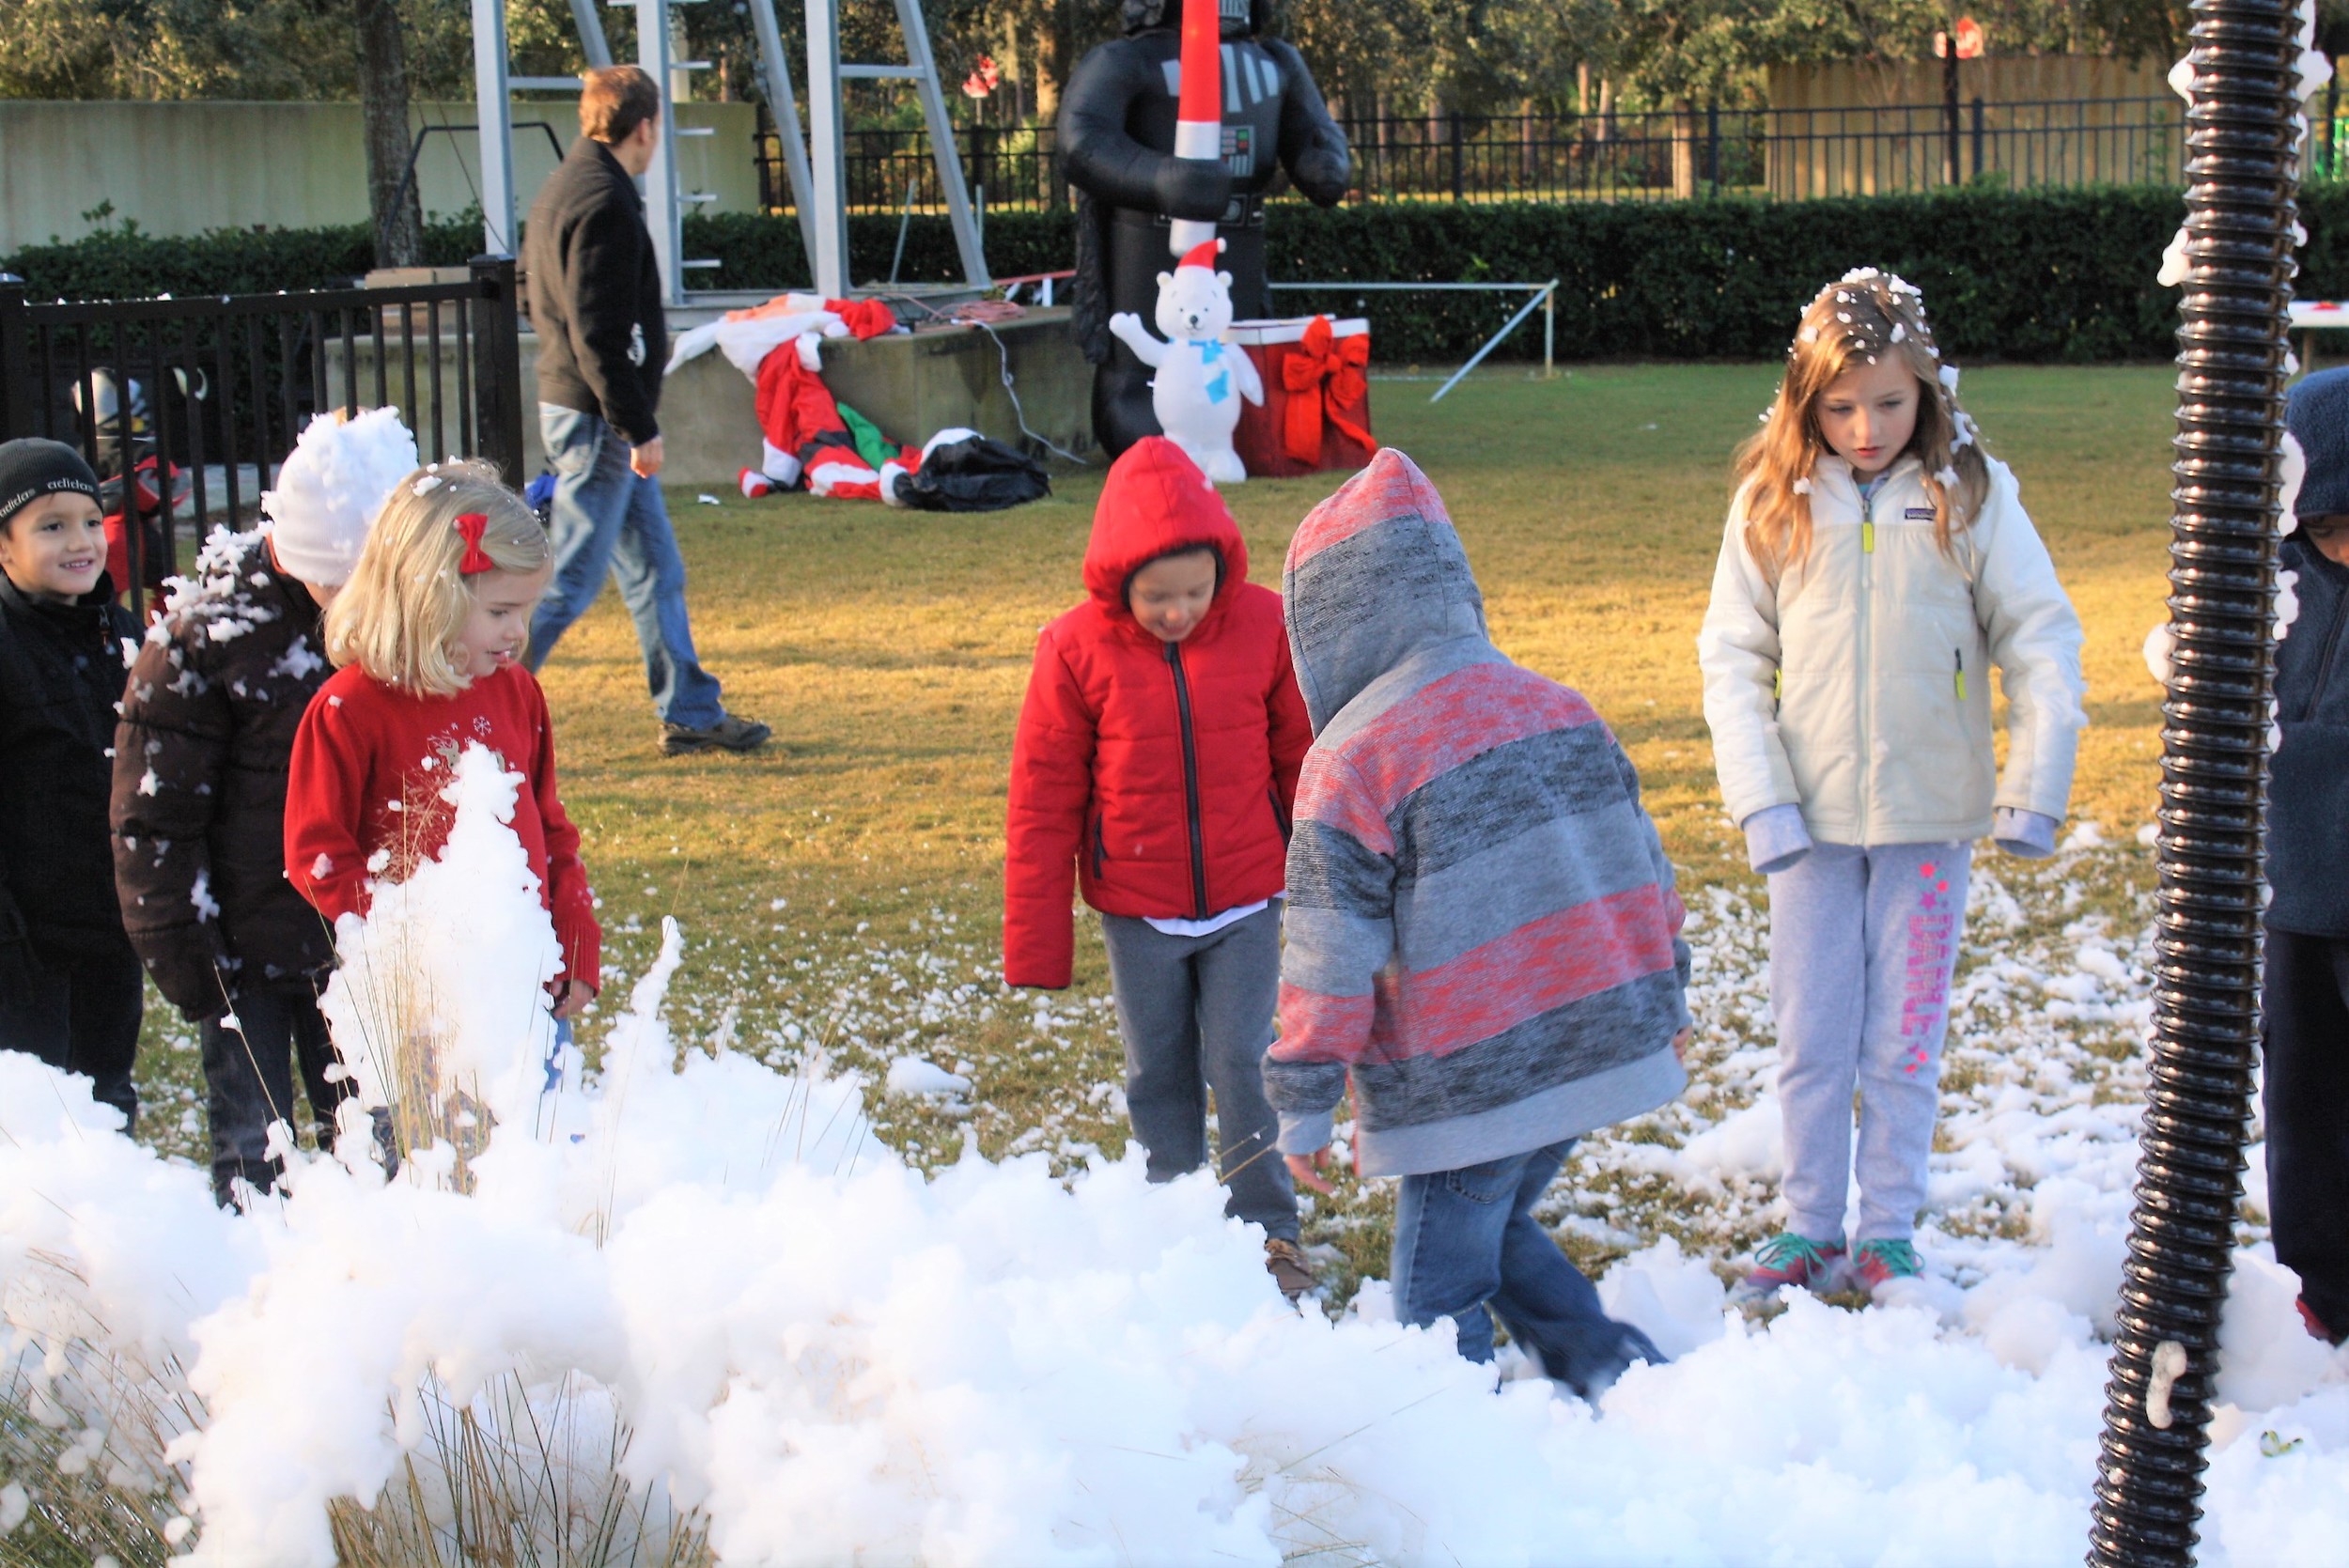 “I’ve got snow in my shoes!” Nocatee kids enjoy playing in the “snow.”